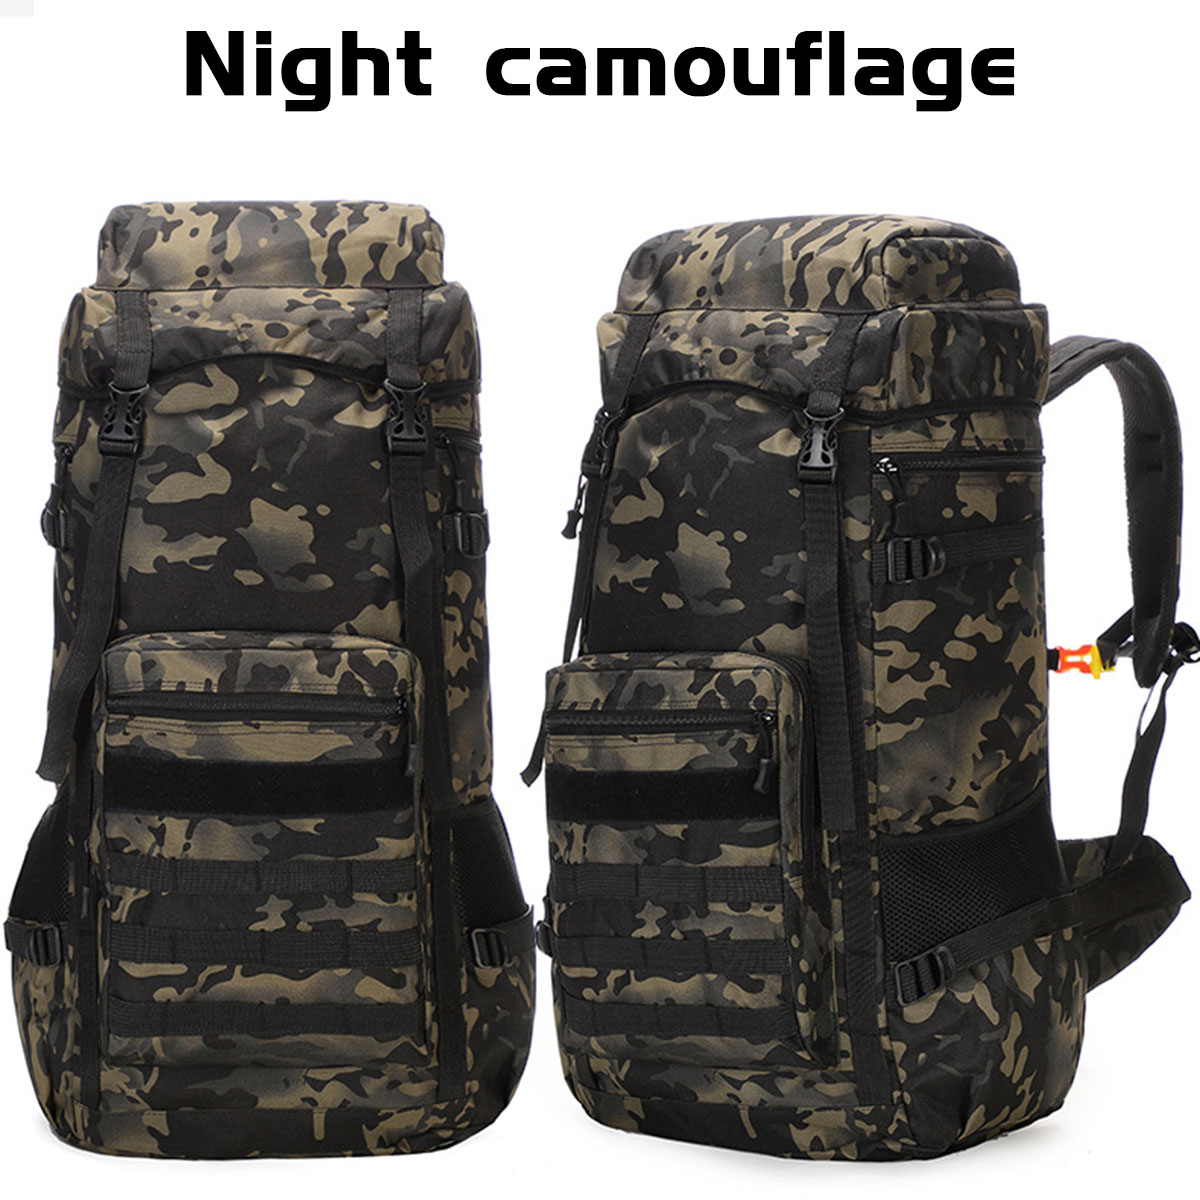 70L-Outdoor-Waterproof-Military-Tactical-Backpack-Camping-Hiking-Backpack-Trekking-Camouflage-Travel-1759458-11